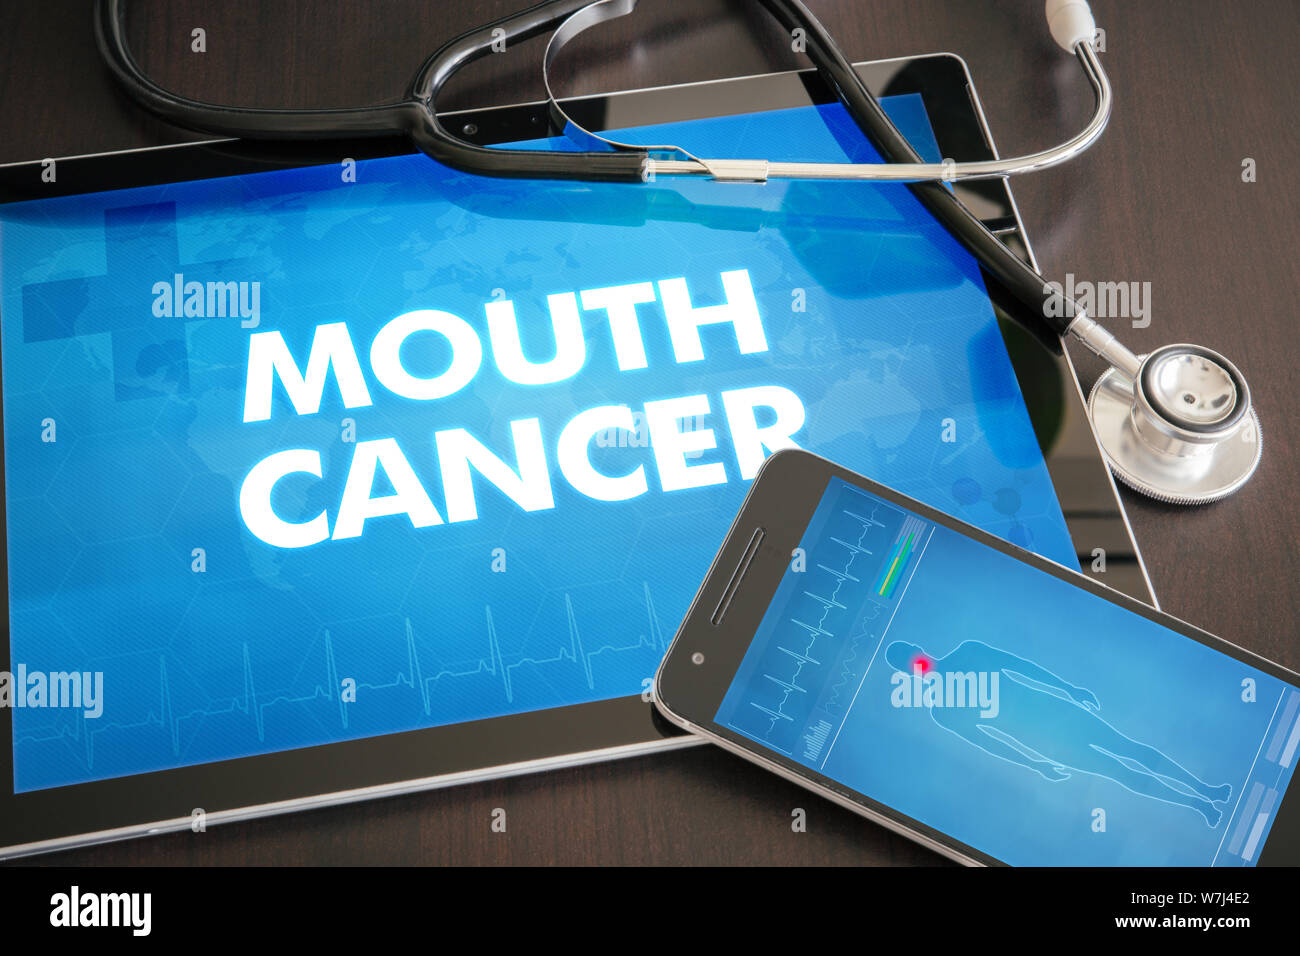 Mouth cancer (cancer type) diagnosis medical concept on tablet screen with stethoscope. Stock Photo